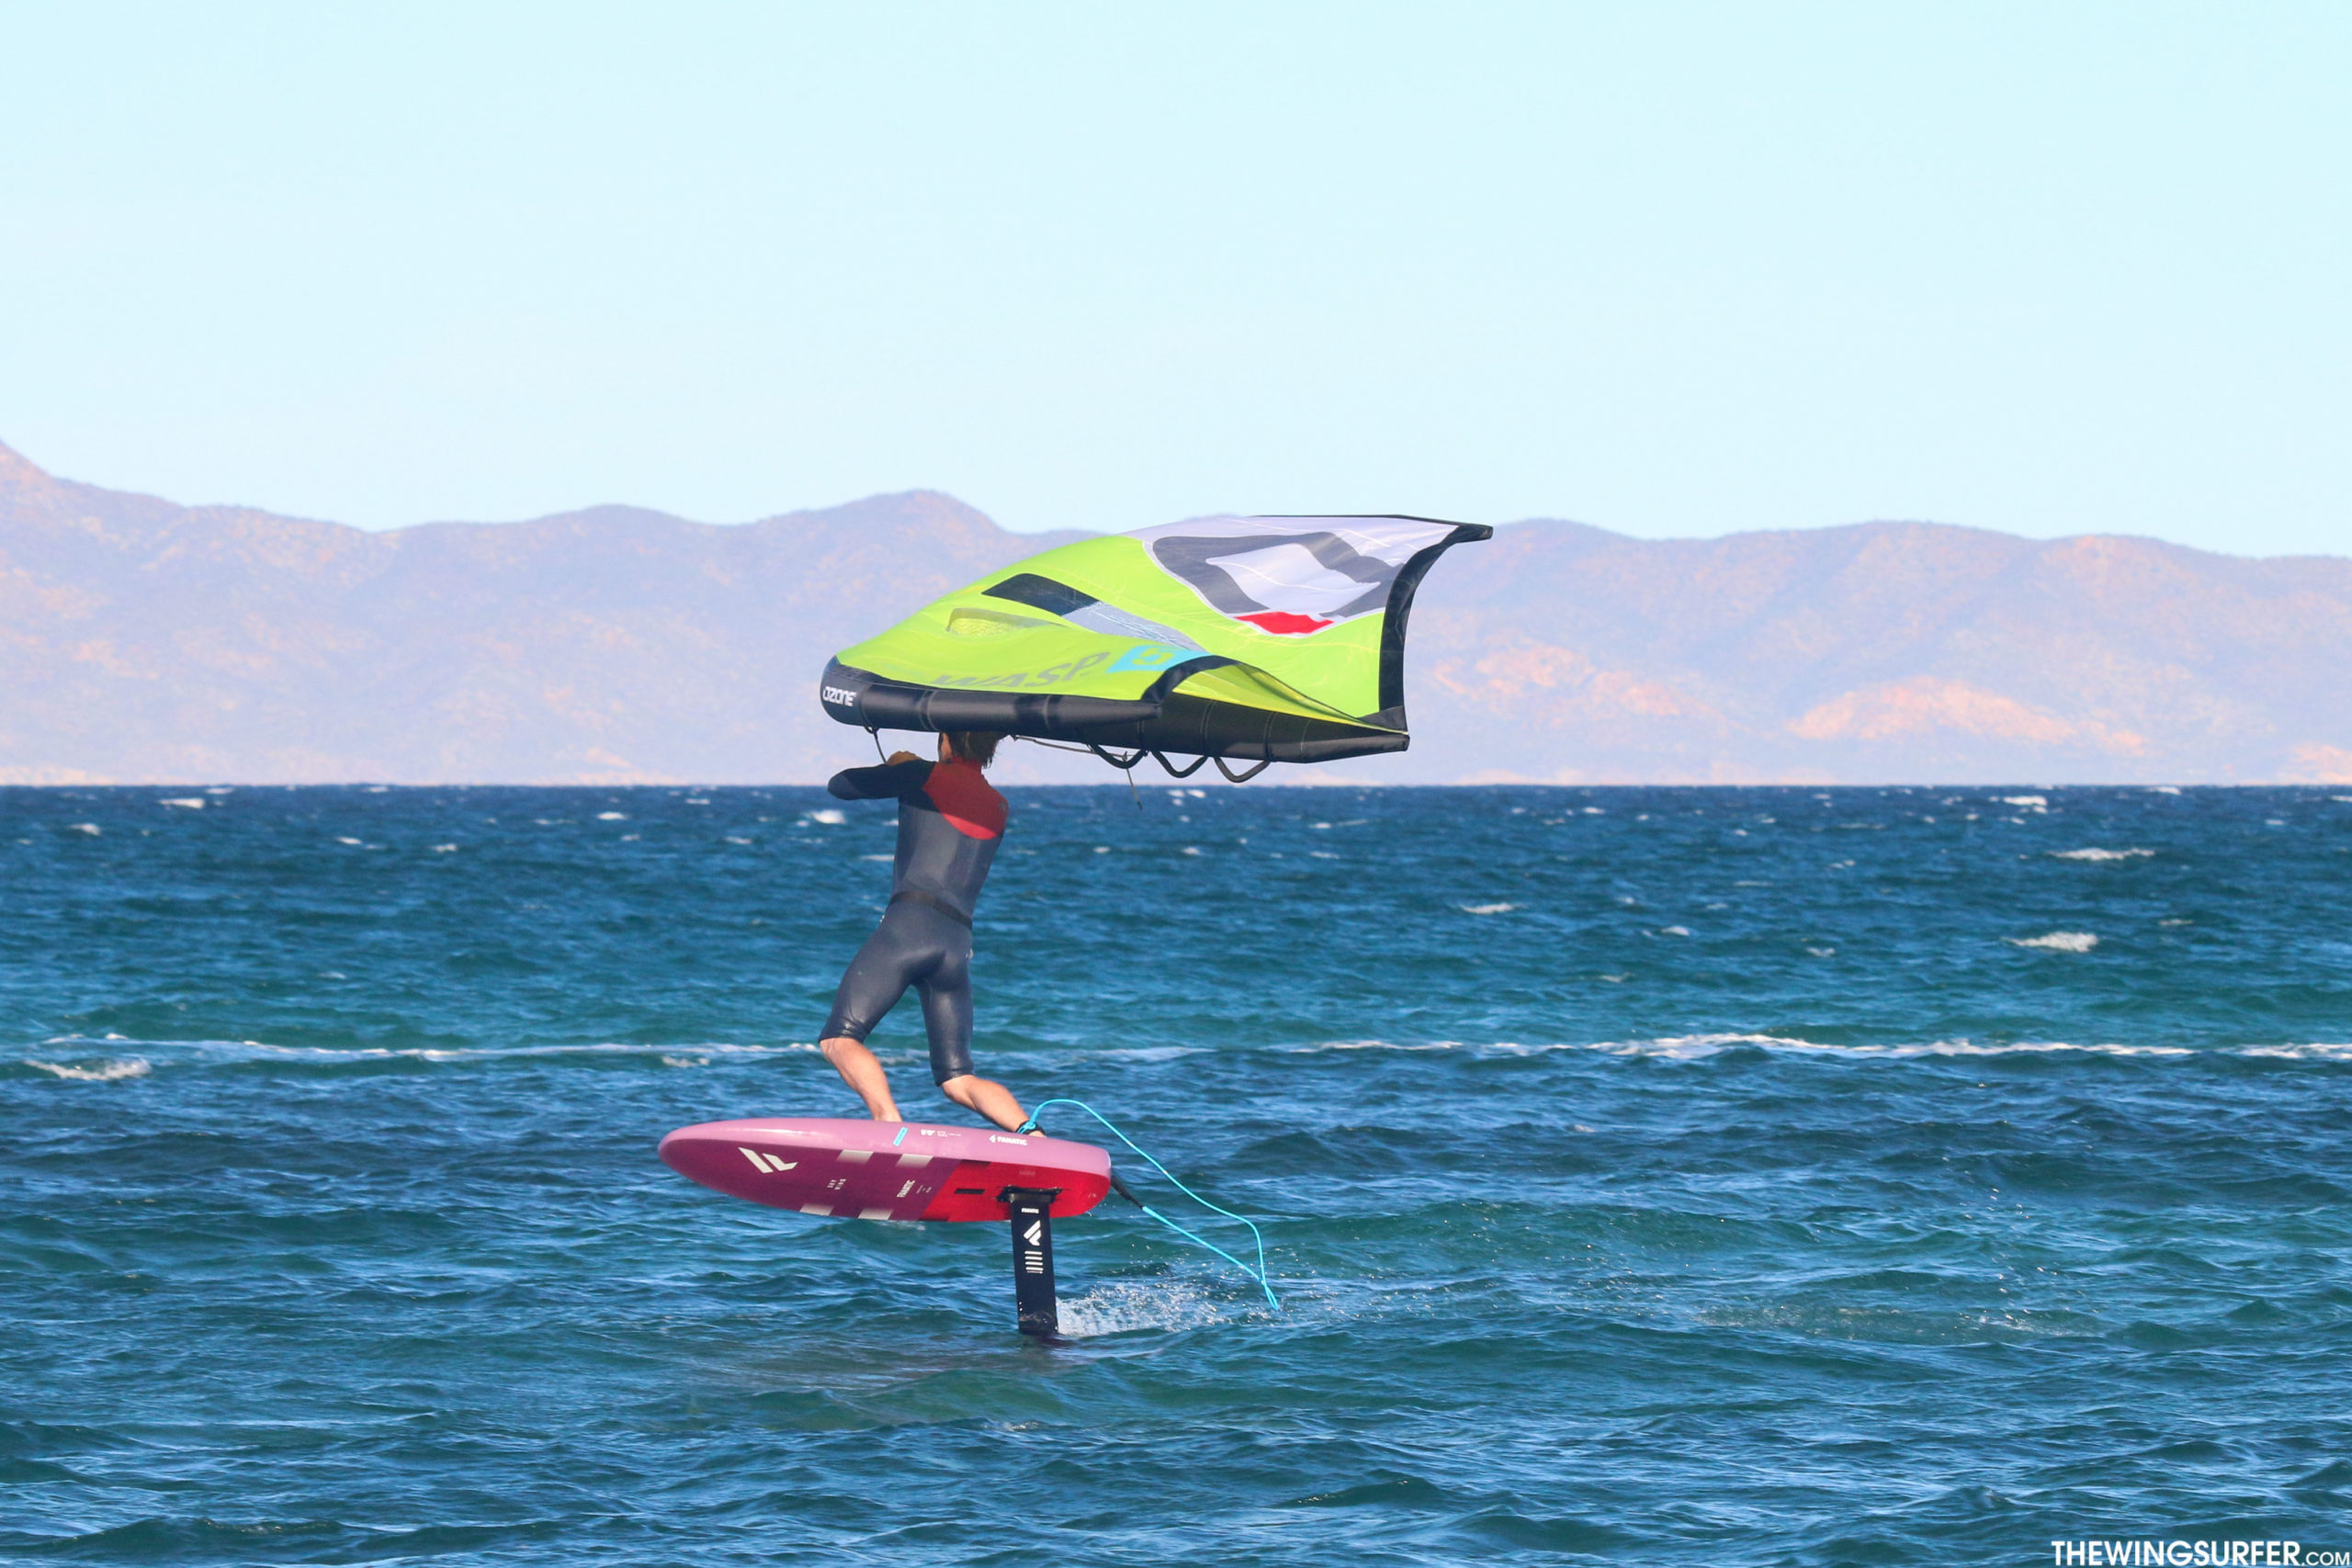 Wing Review: OZONE Wasp V2 - The Wingsurfer Magazine